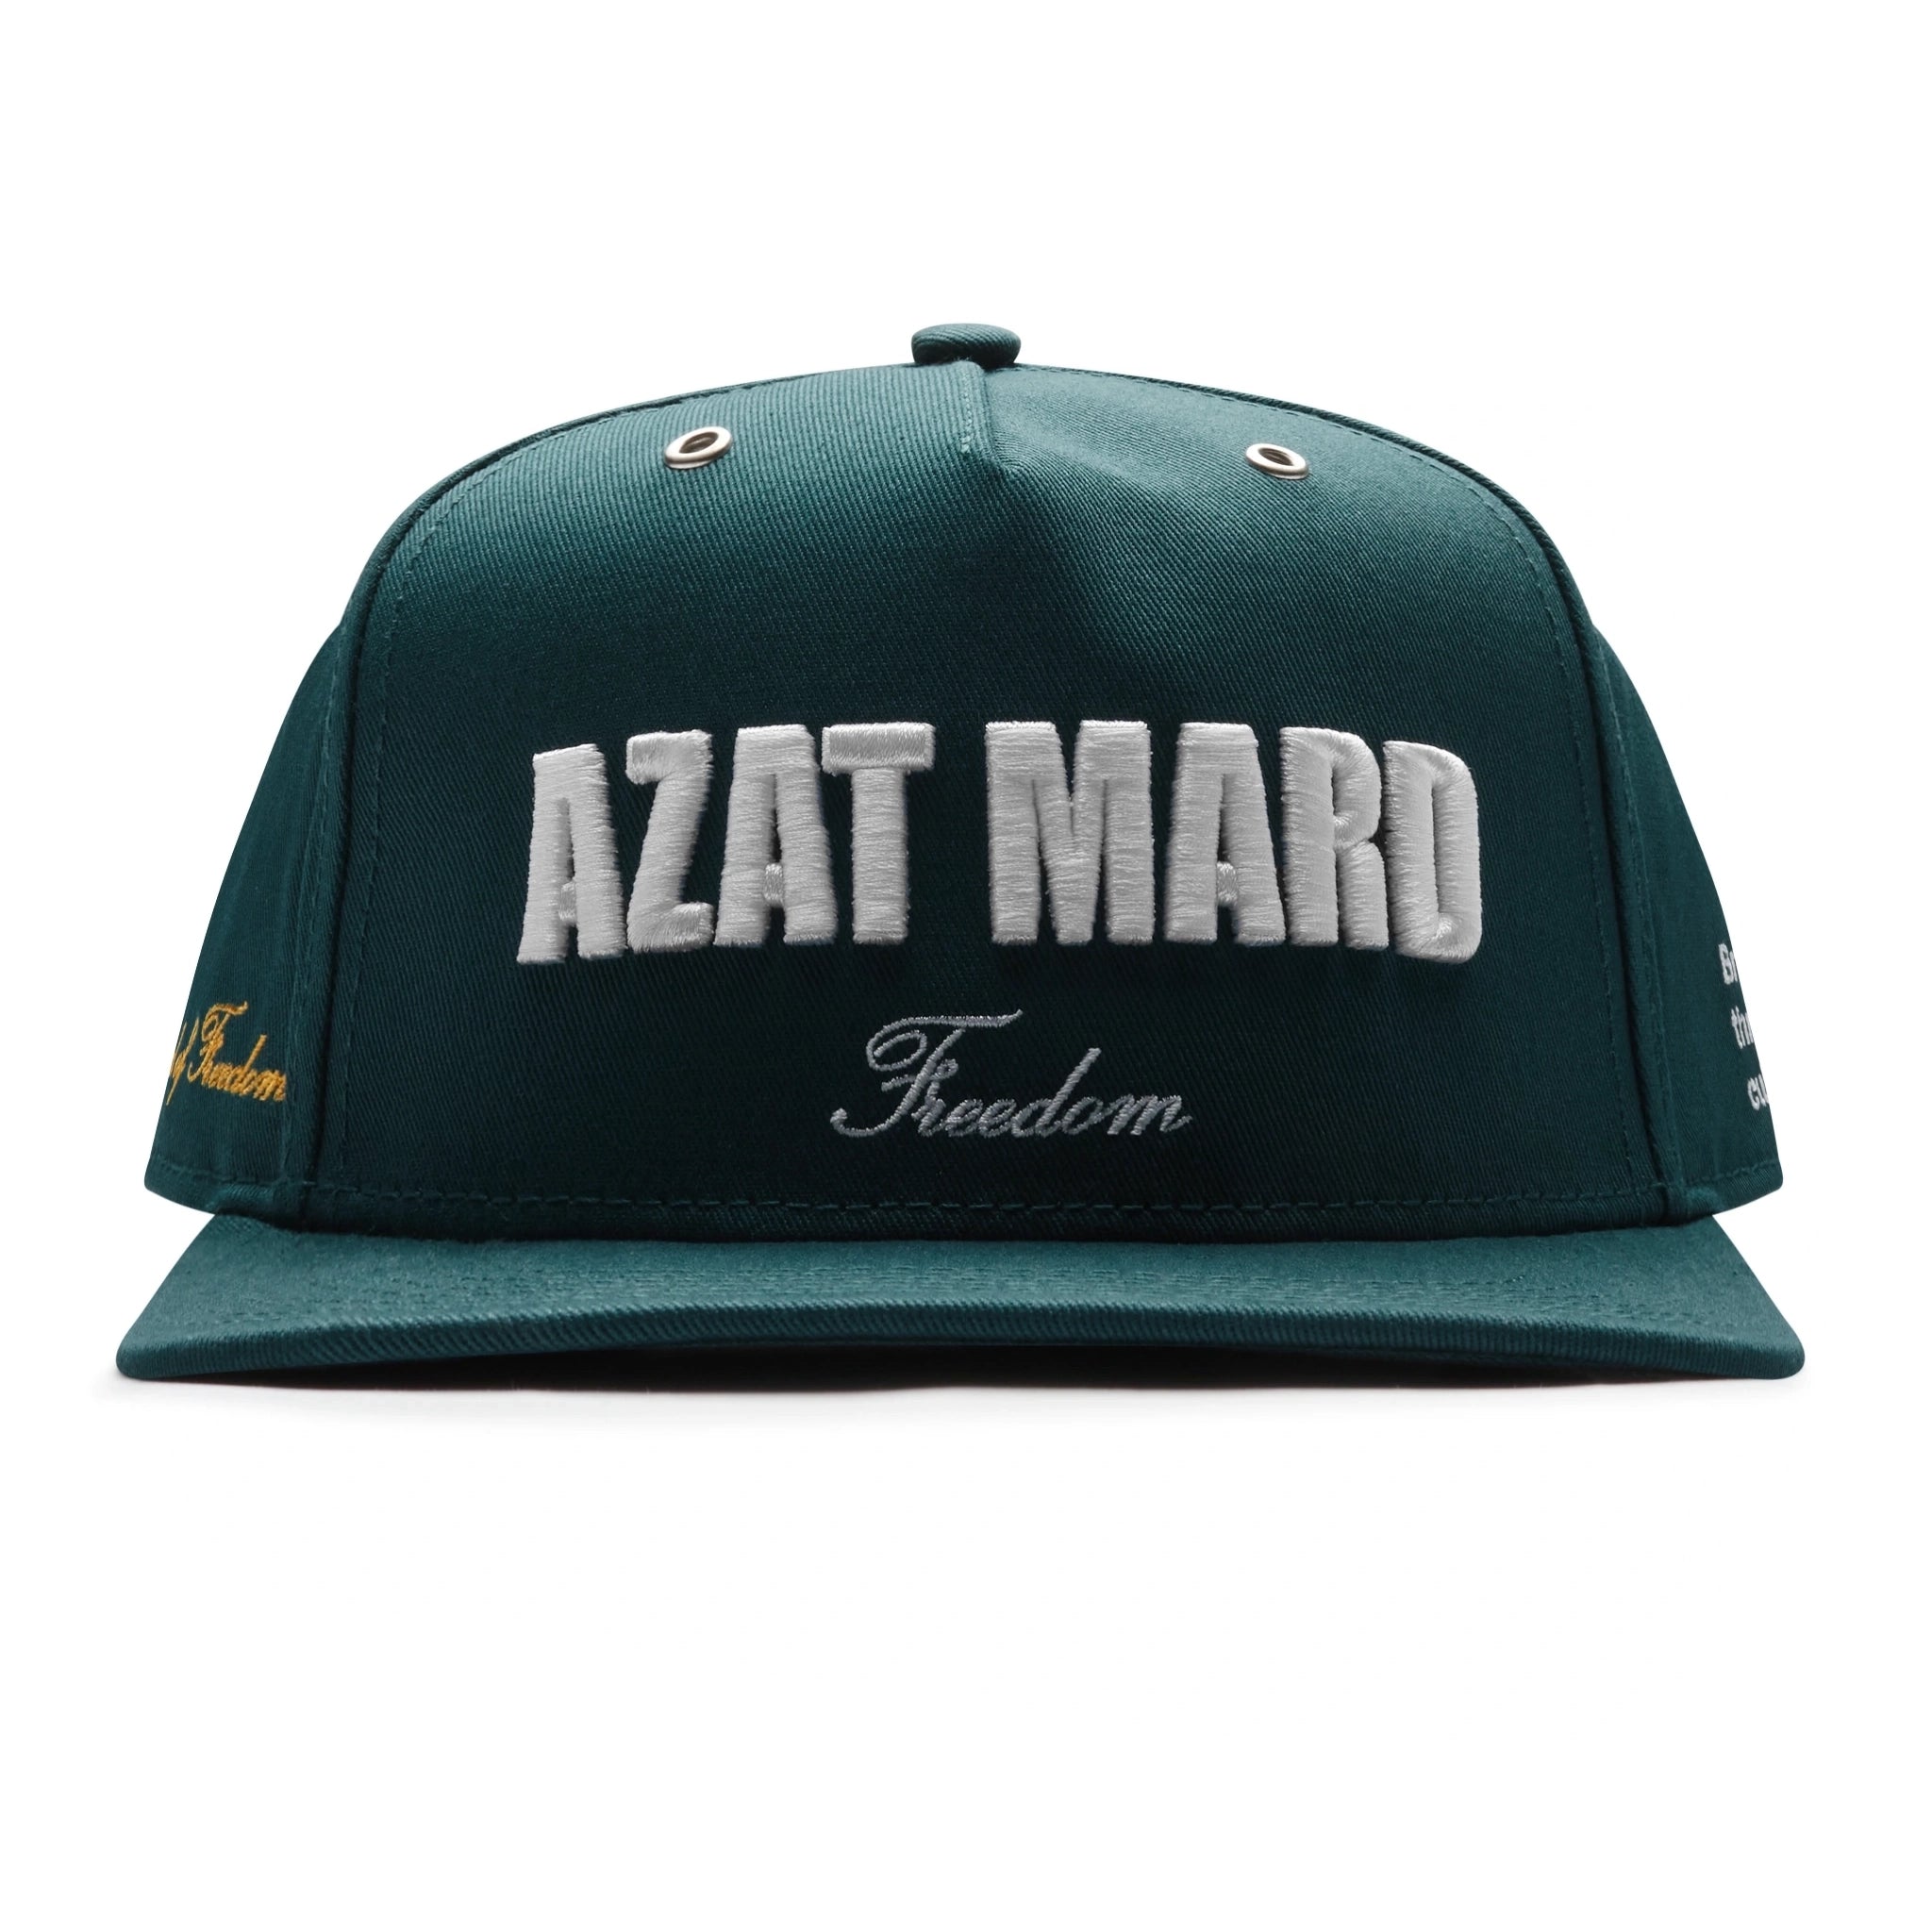 Front view of Azat Mard Freedom Green Cap JF0373